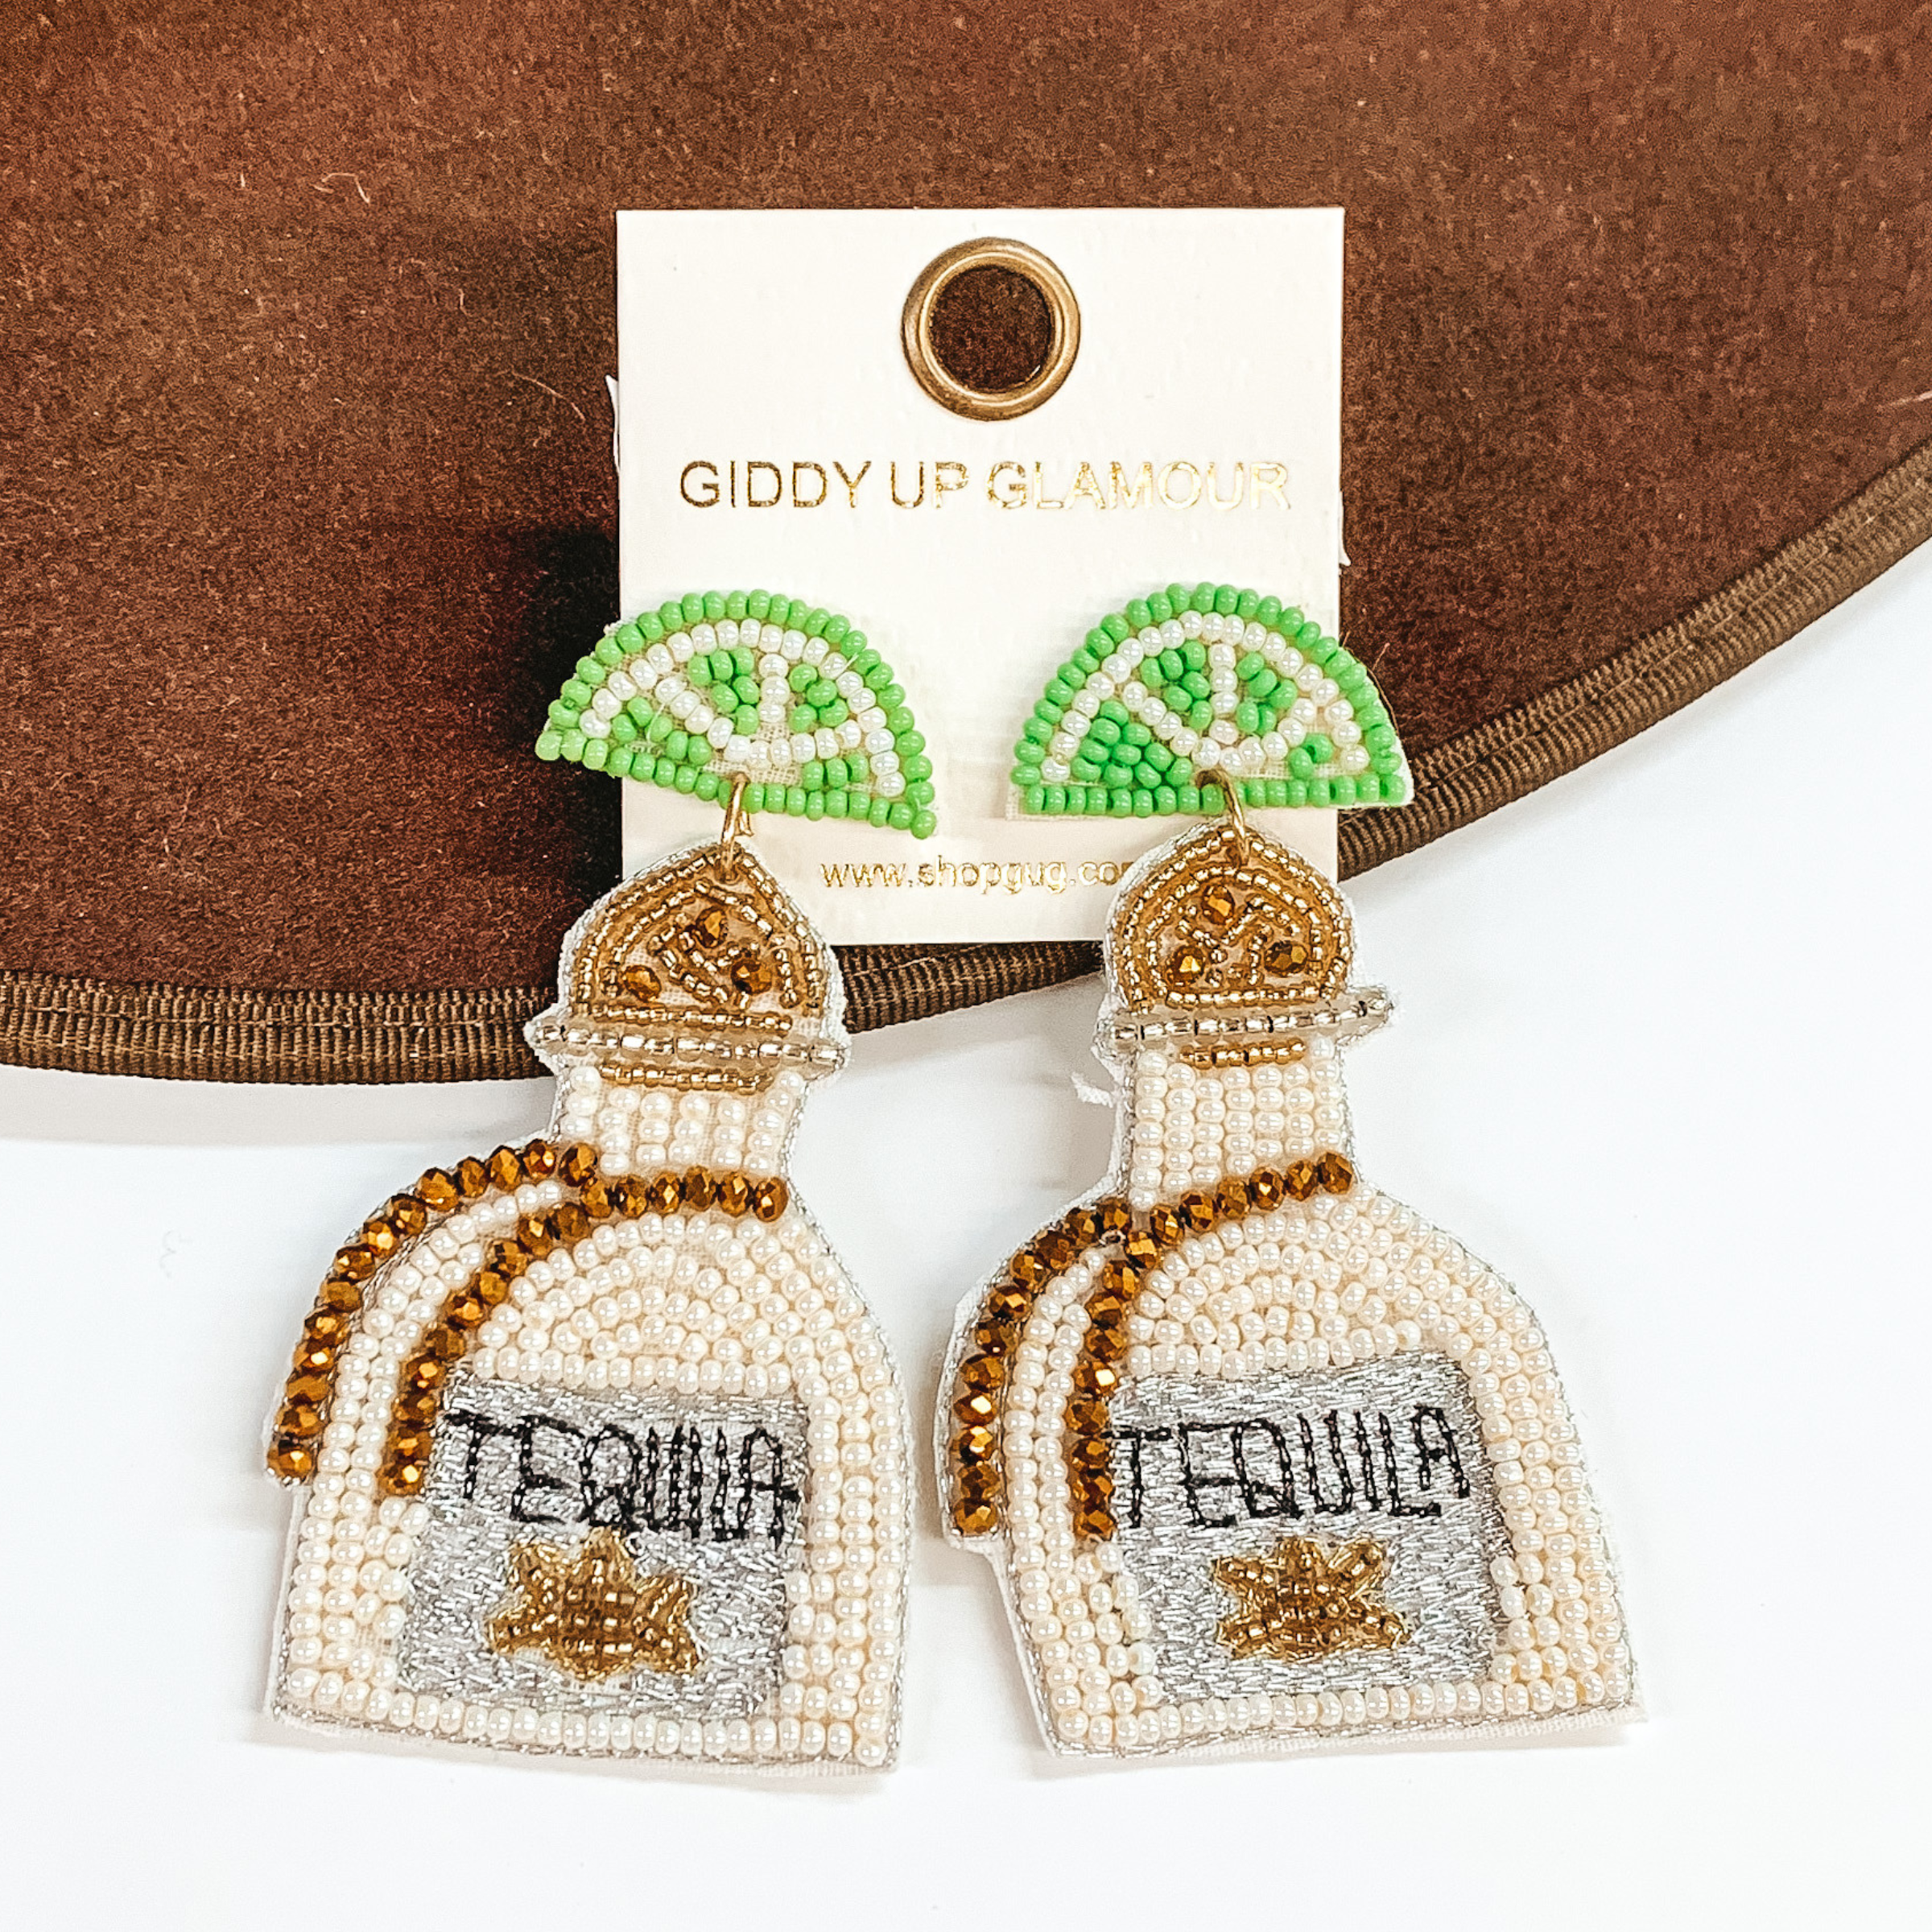 Light green beaded lime stud earrings with hanging beaded bottle. The bottle has a gold beaded top with a ivory beaded body with brown beaded stripes. The center on the bottom is grey stitched with the word "TEQUILA" stitched in black. These earrings are pictured on a dark brown object on a white background.